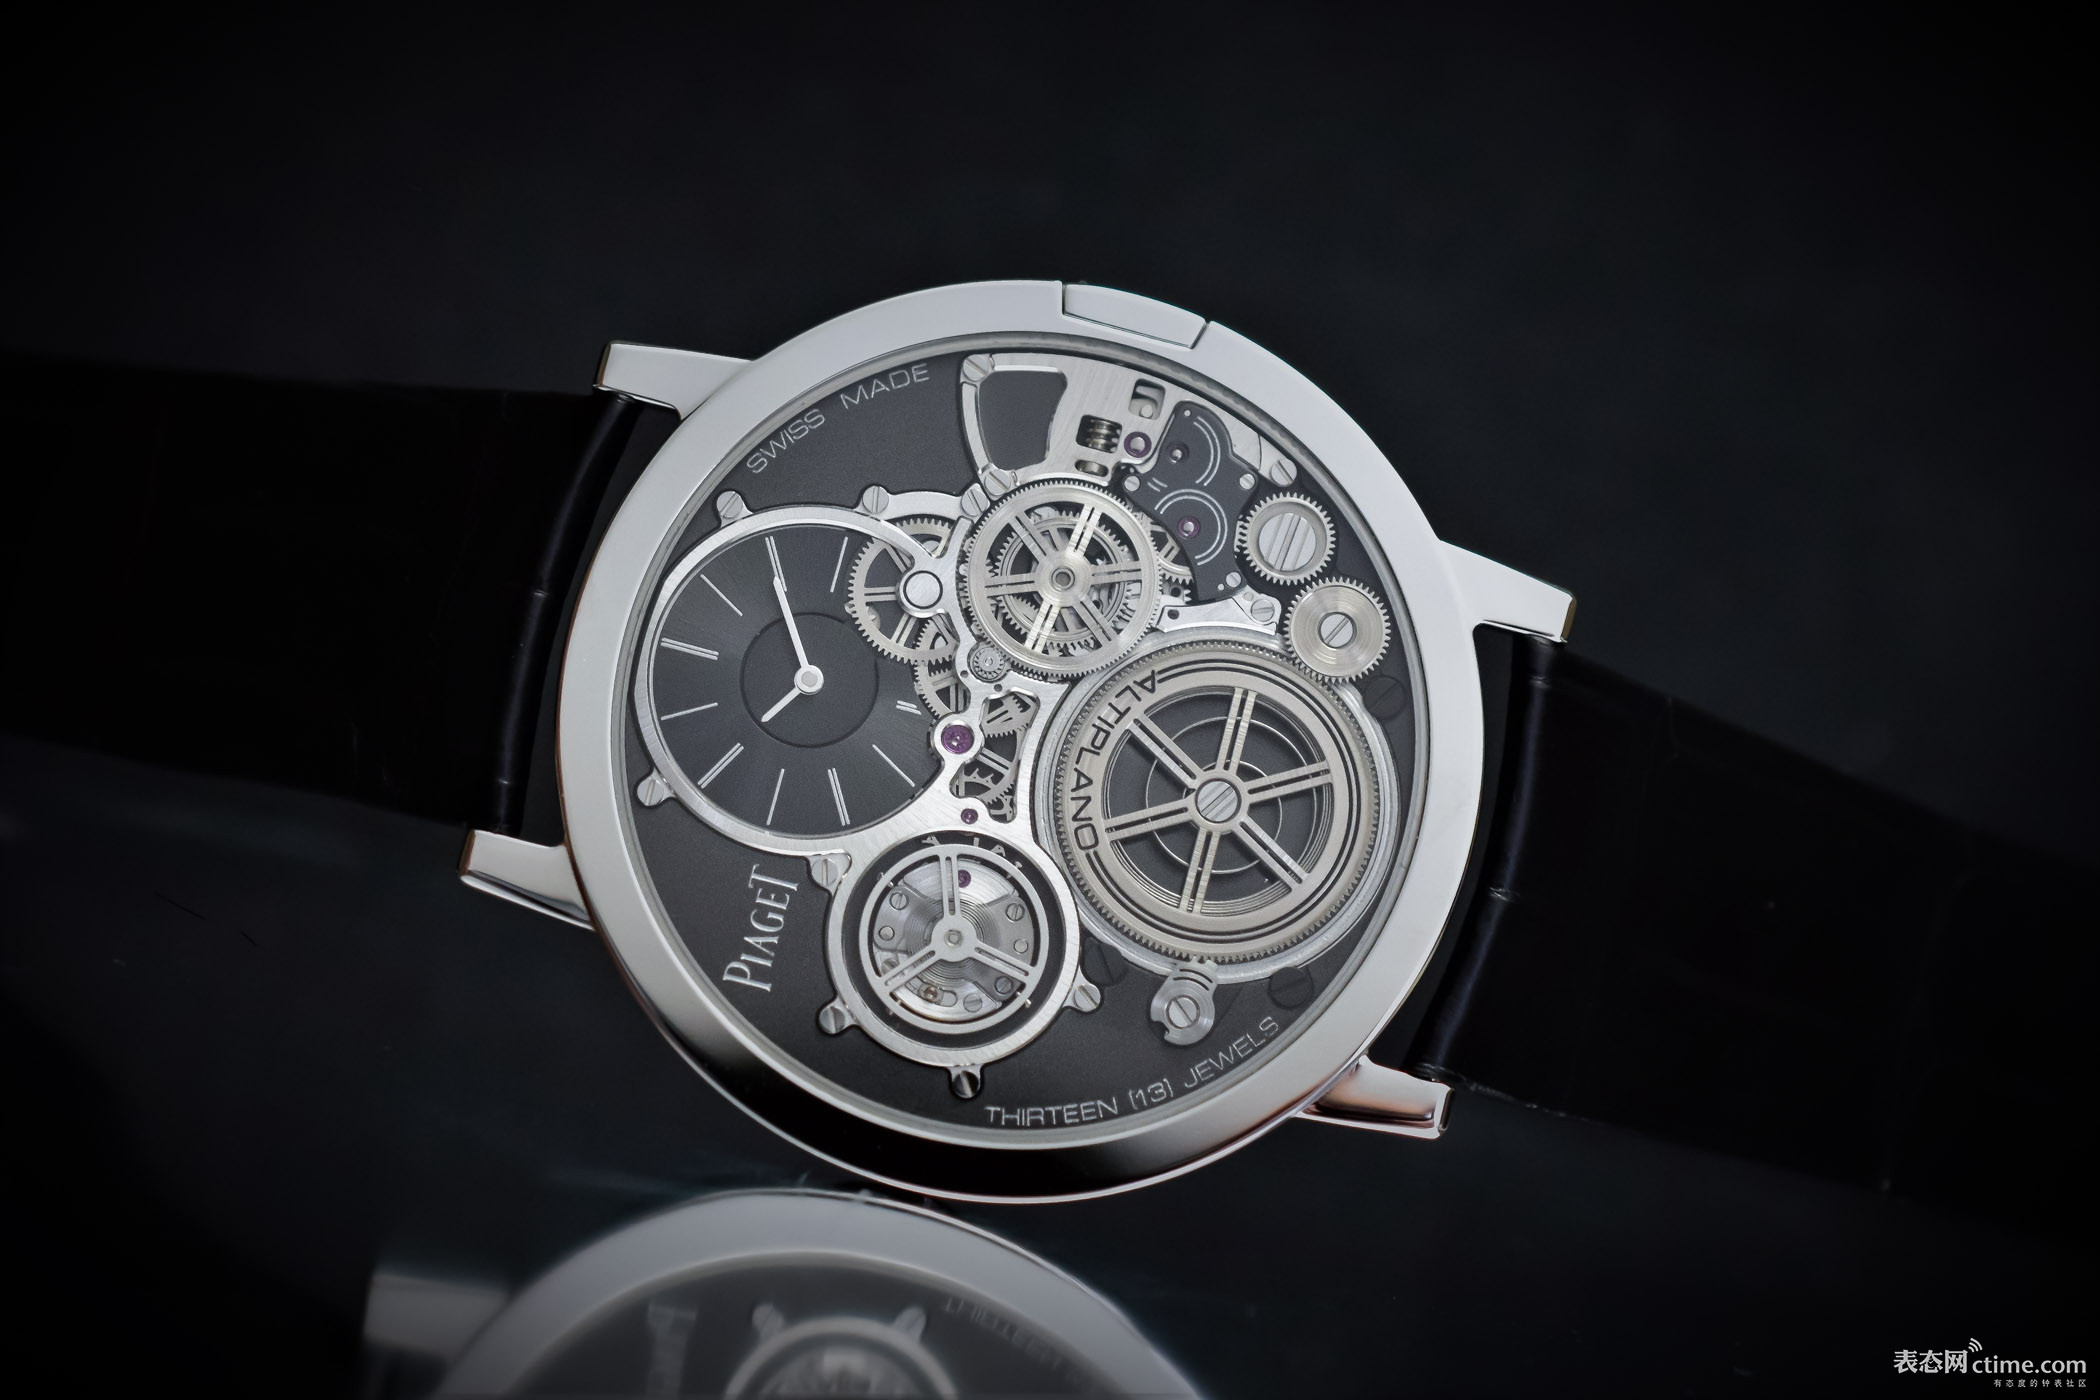 Piaget-Altiplano-Ultimate-Concept-thinnest-mechanical-watch-in-the-world-2mm-13.jpg